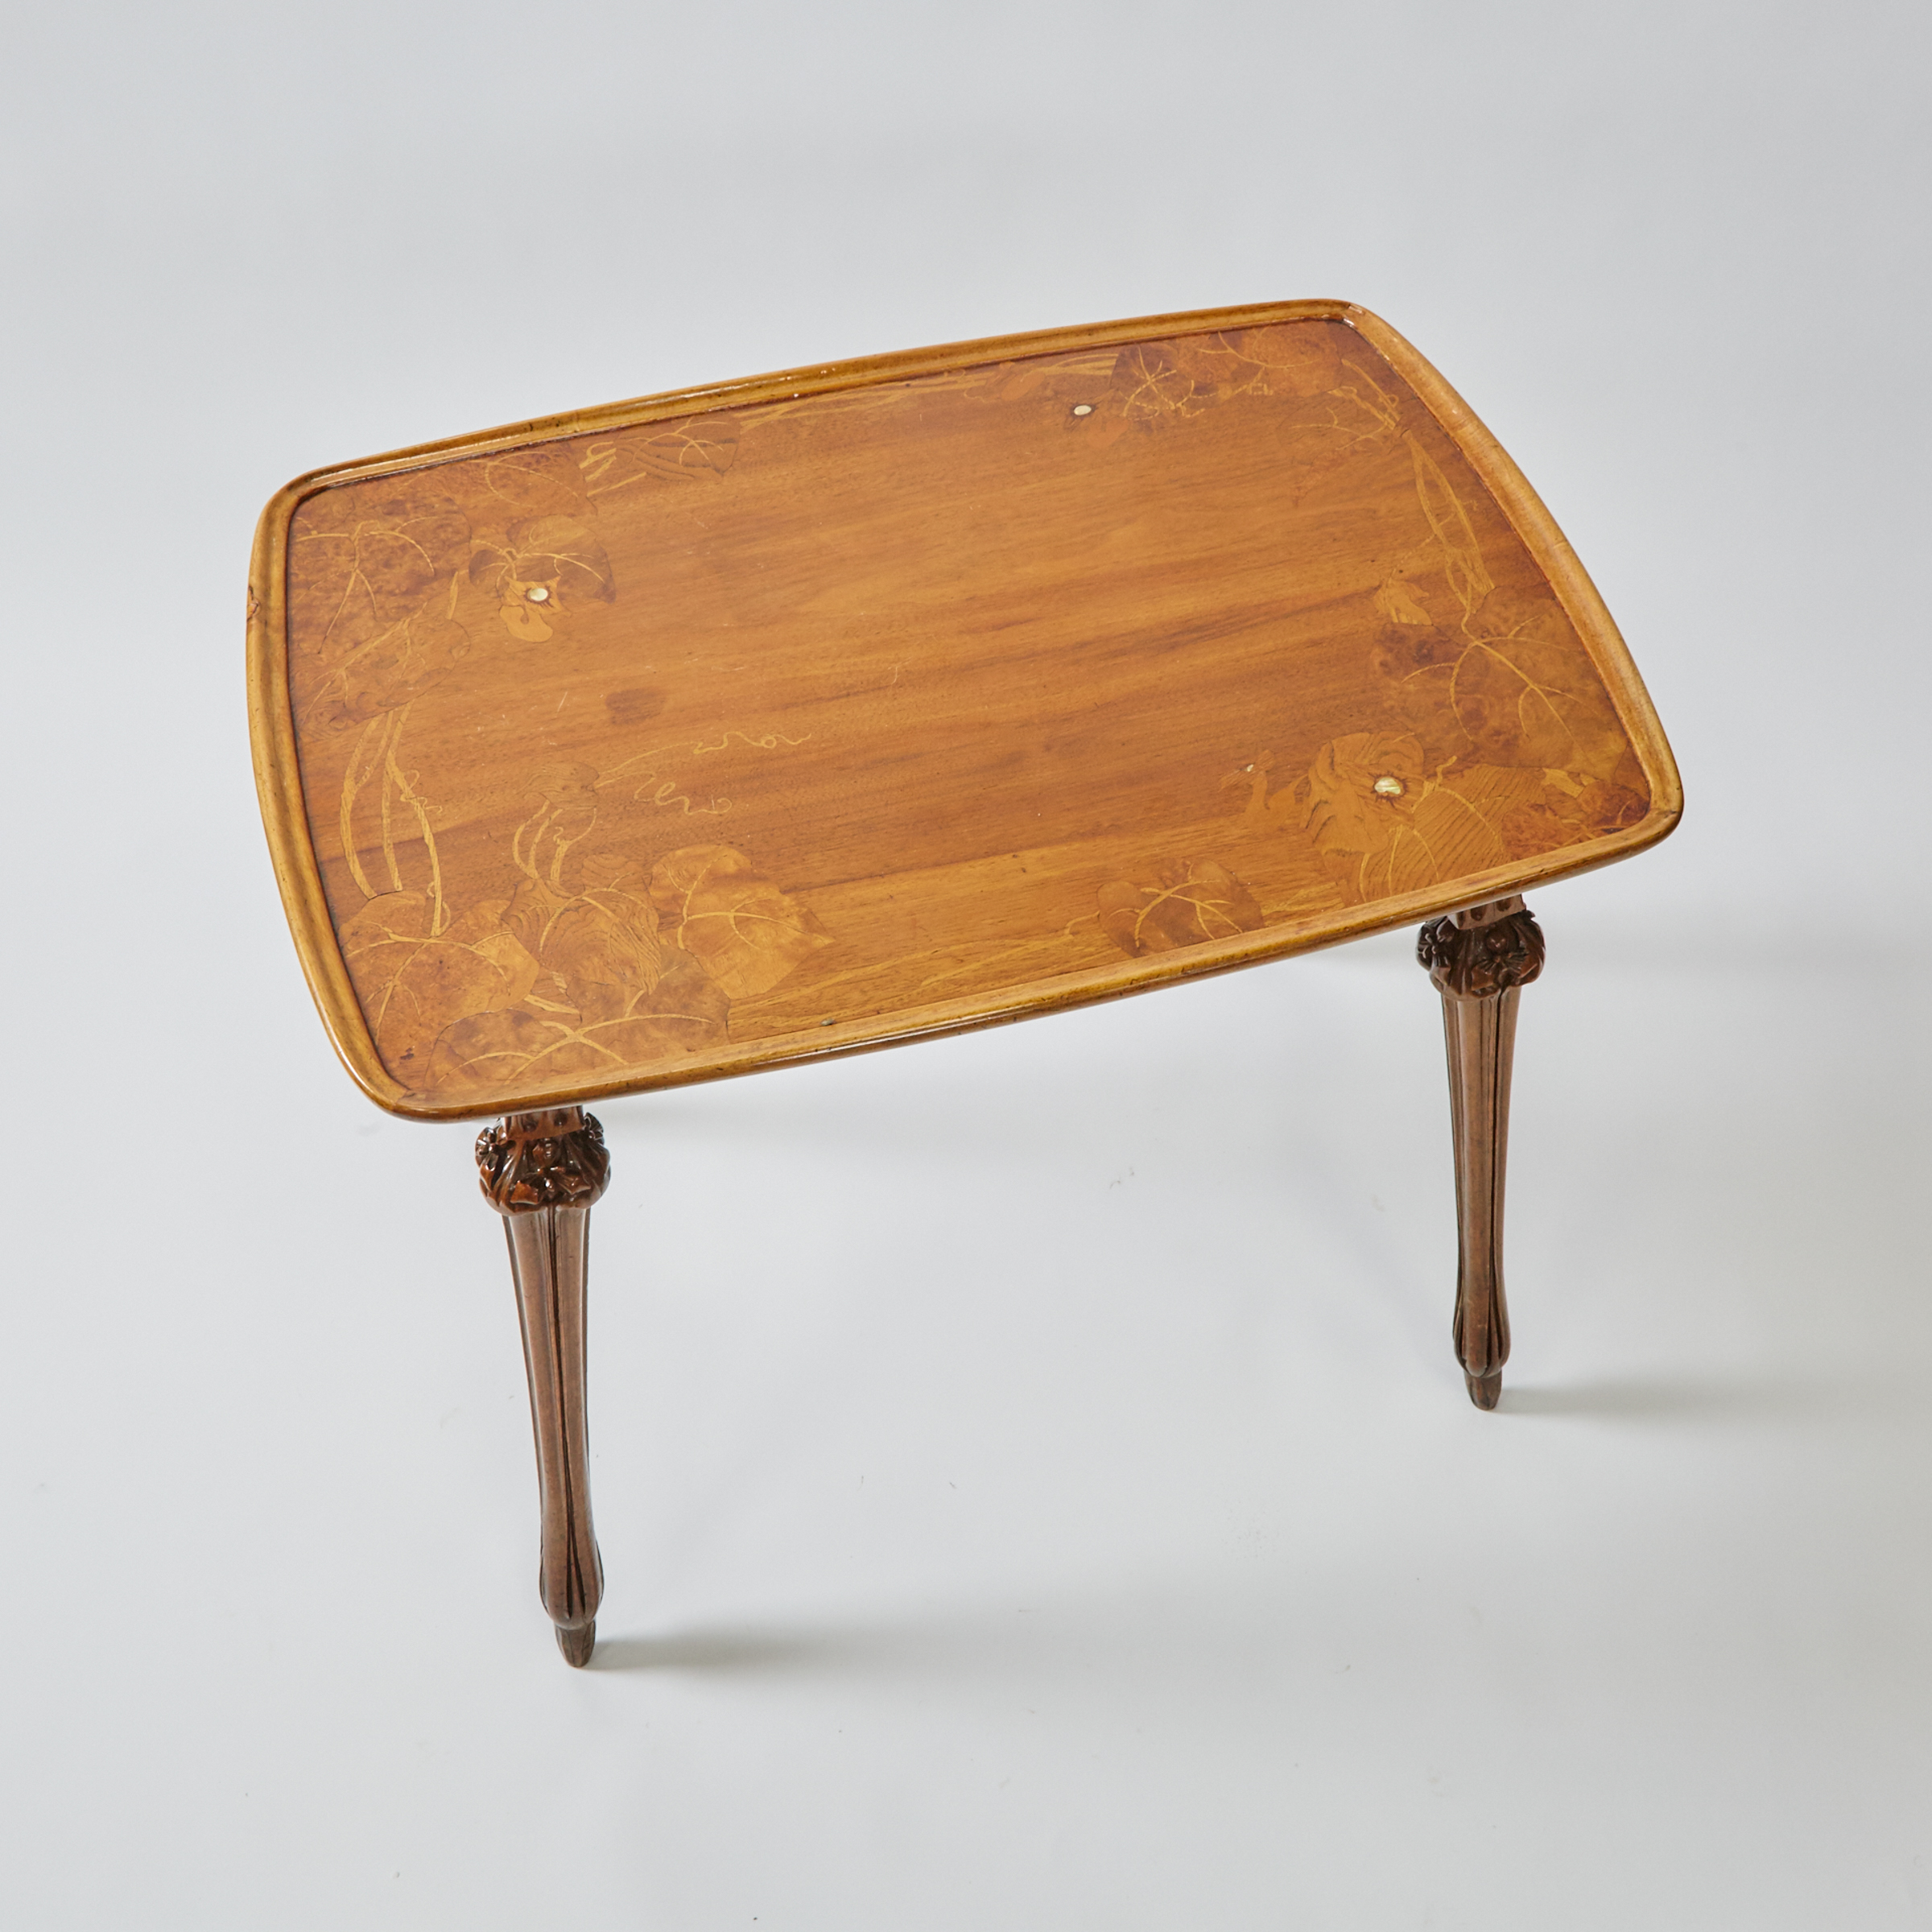 Louis Majorelle French Art Nouveau Mixed Wood Marquetry Inlaid Tea Table, 19th/early 20th century